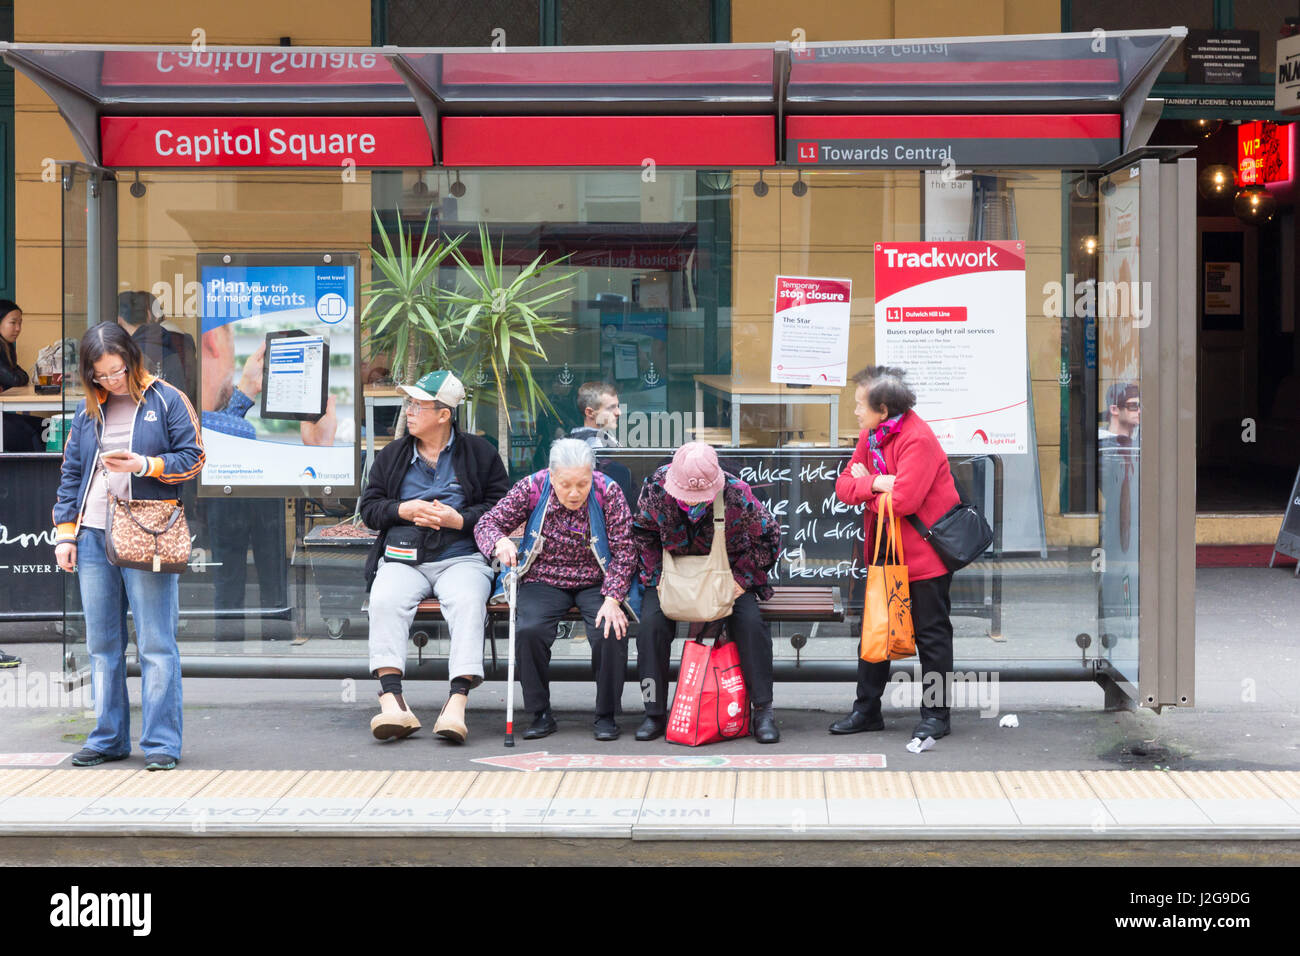 Passengers waiting for the tram at the Capitol Square stop in Chinatown, Sydney, Australia Stock Photo